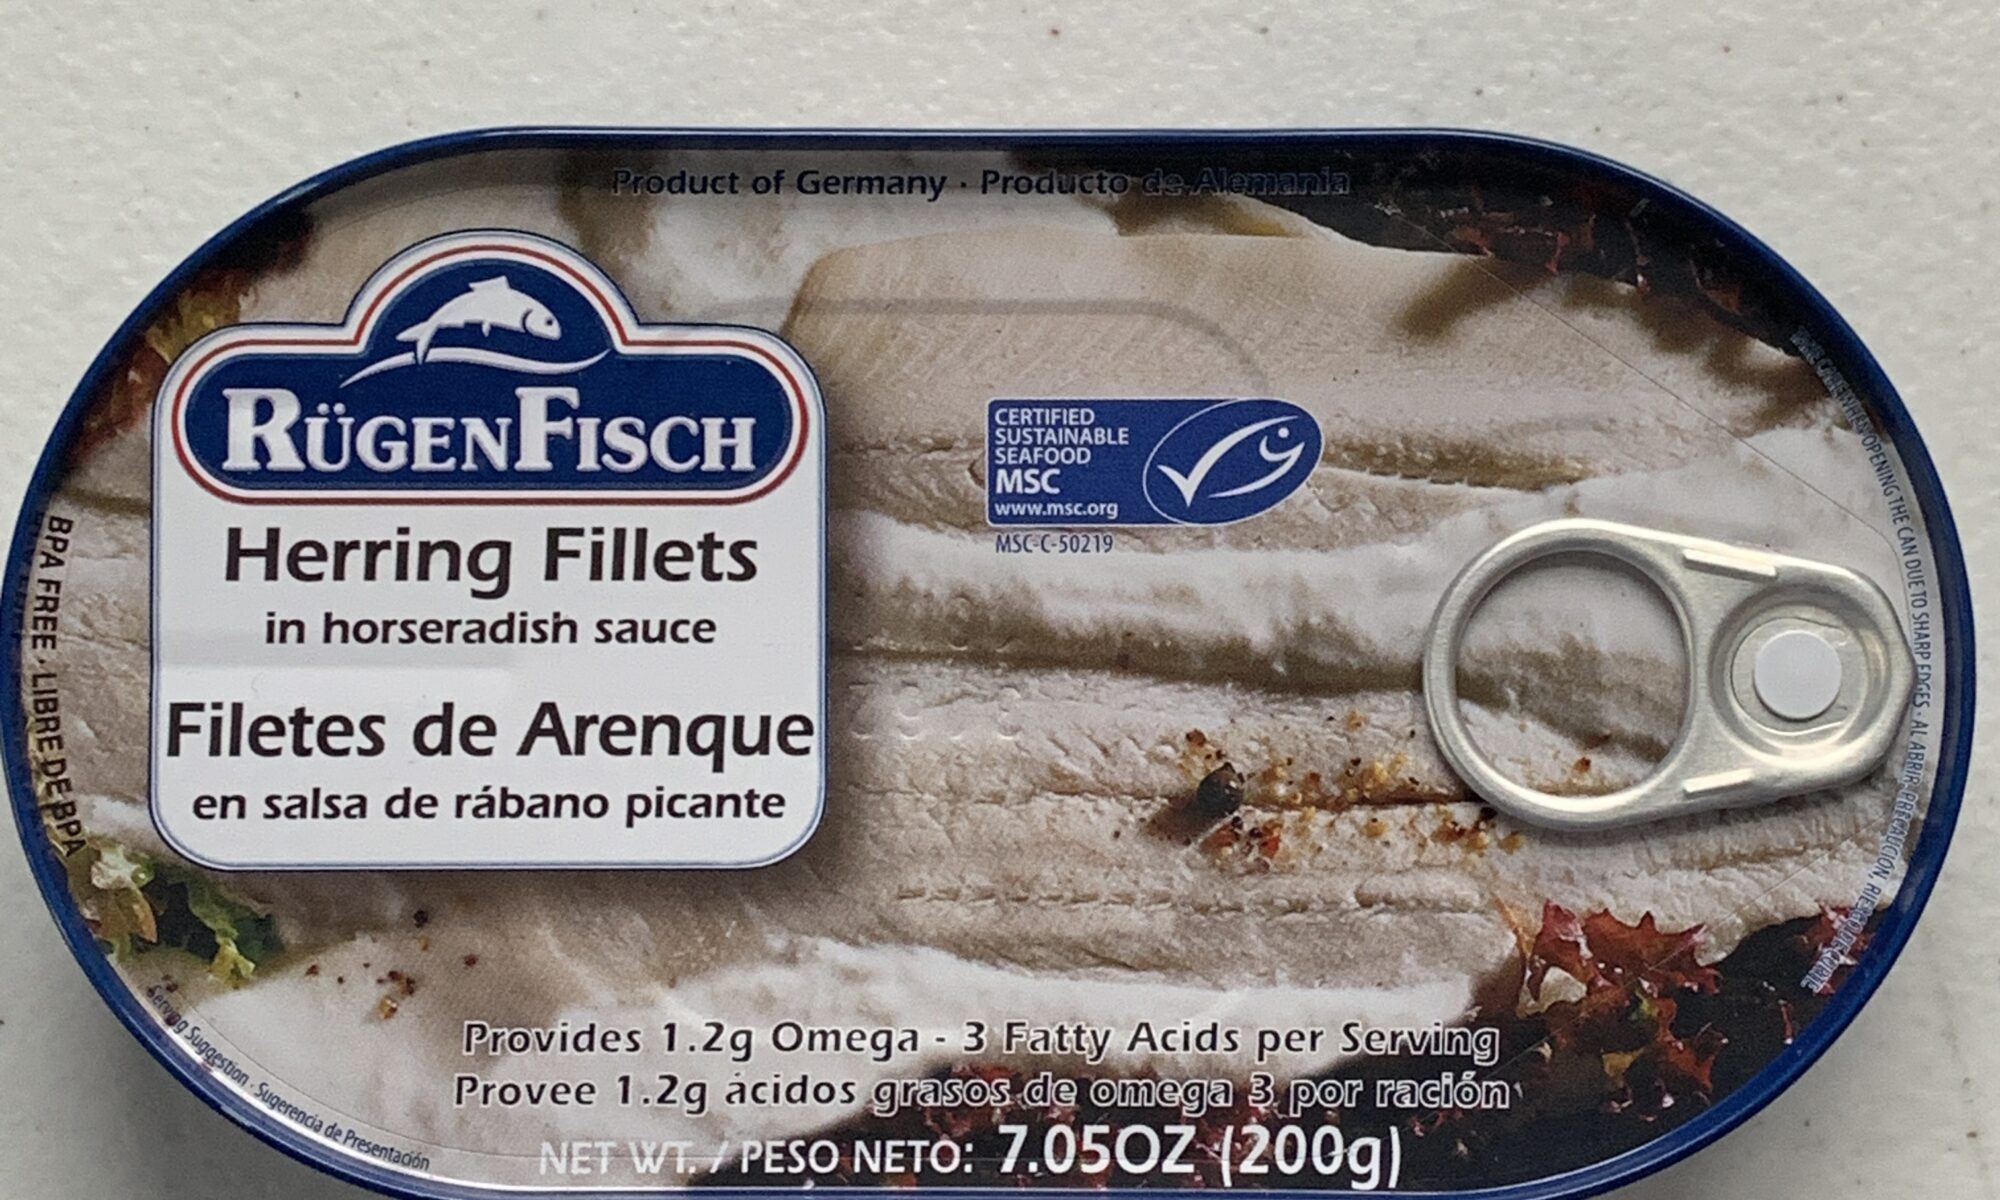 Image of the front of a tin of Rügen Fisch Herring Fillets in Horseradish Sauce